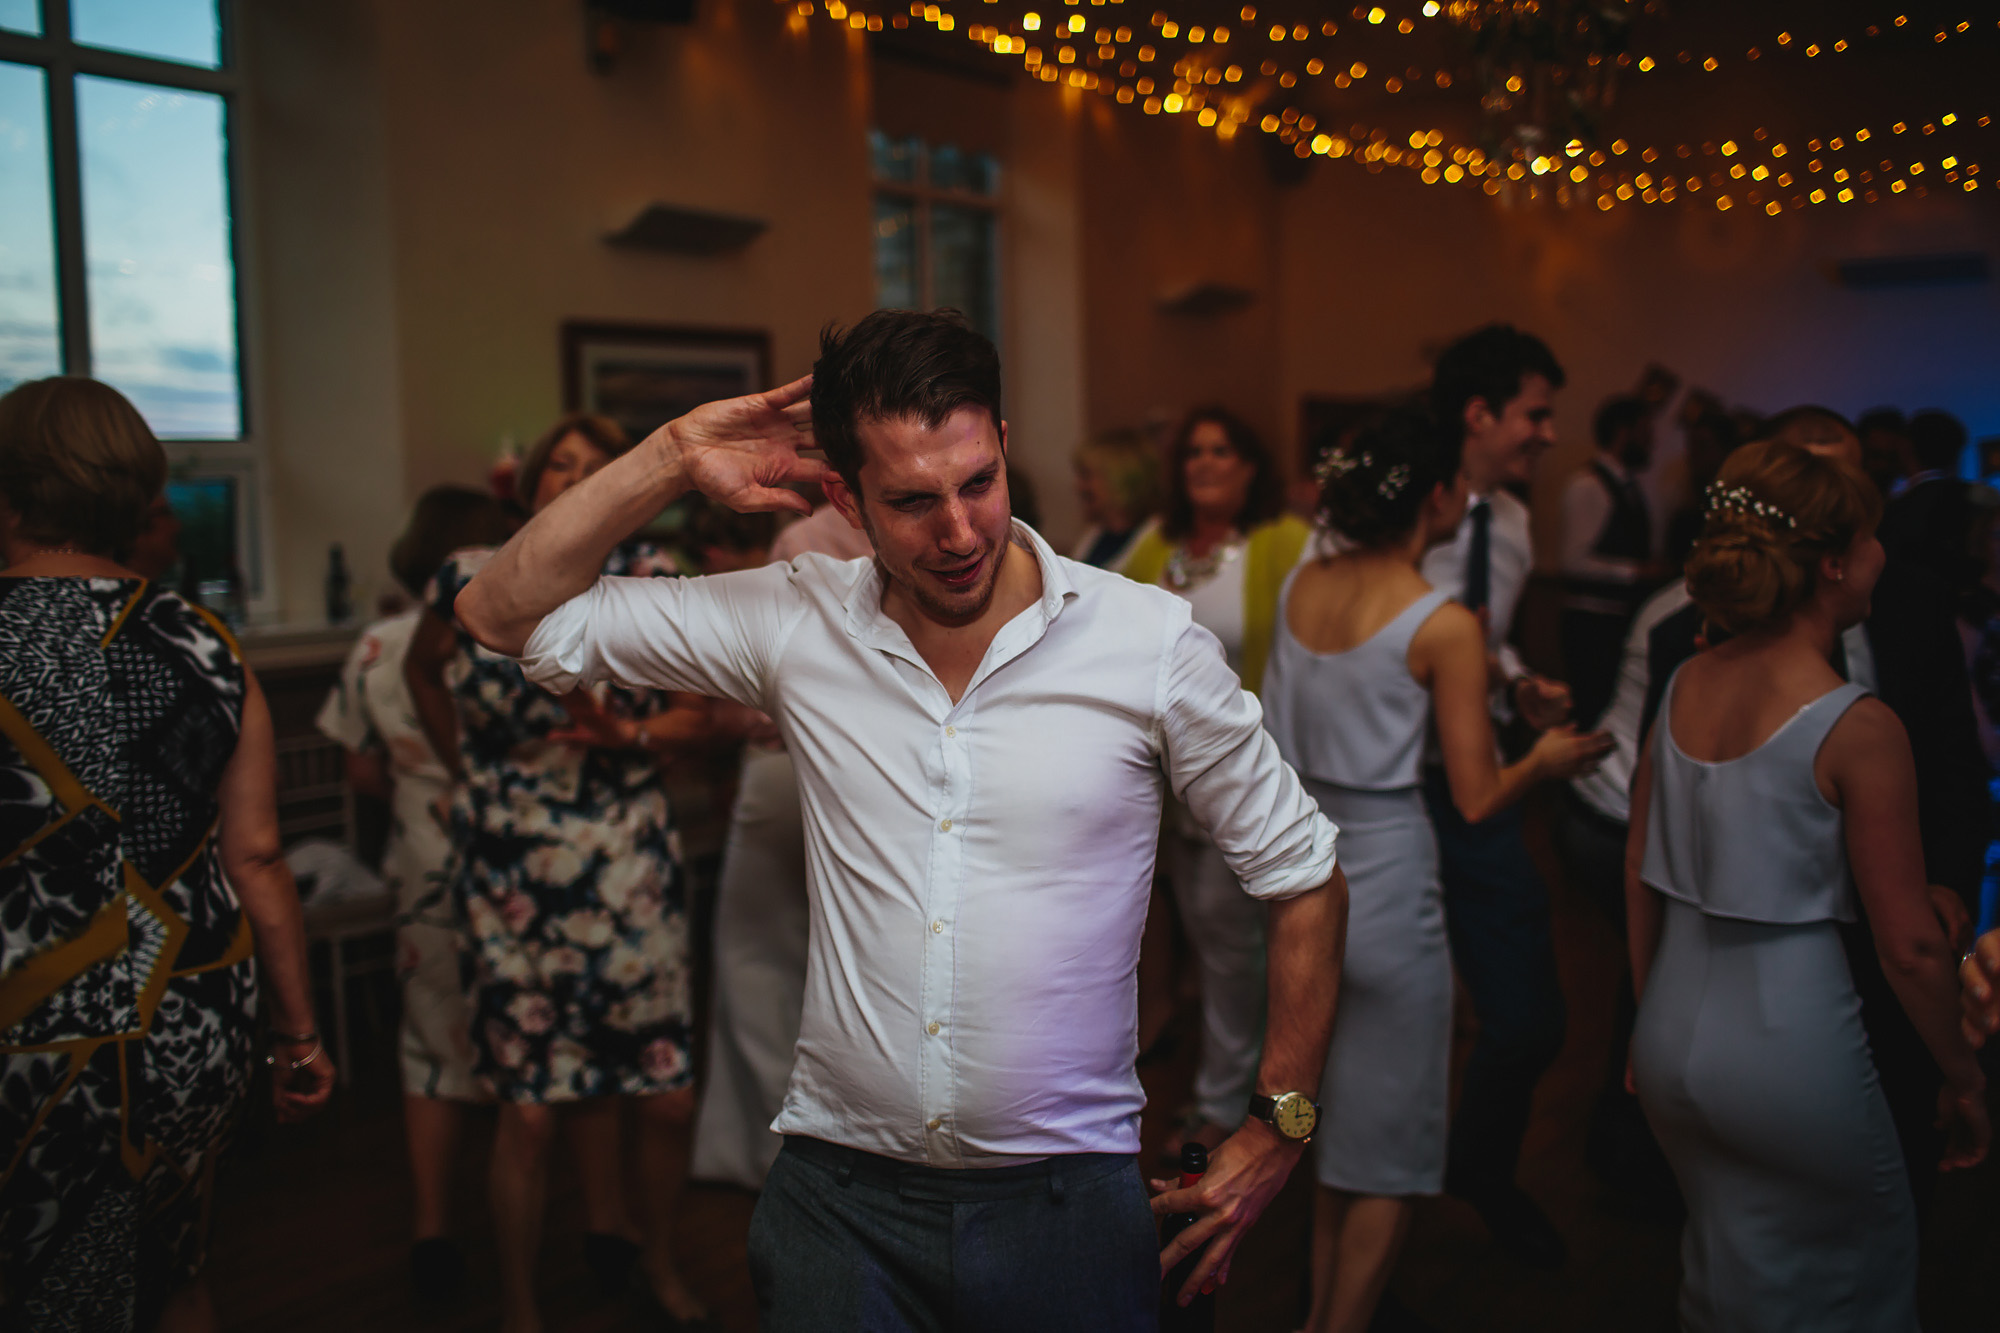 Sweaty man dances at a wedding and its funny